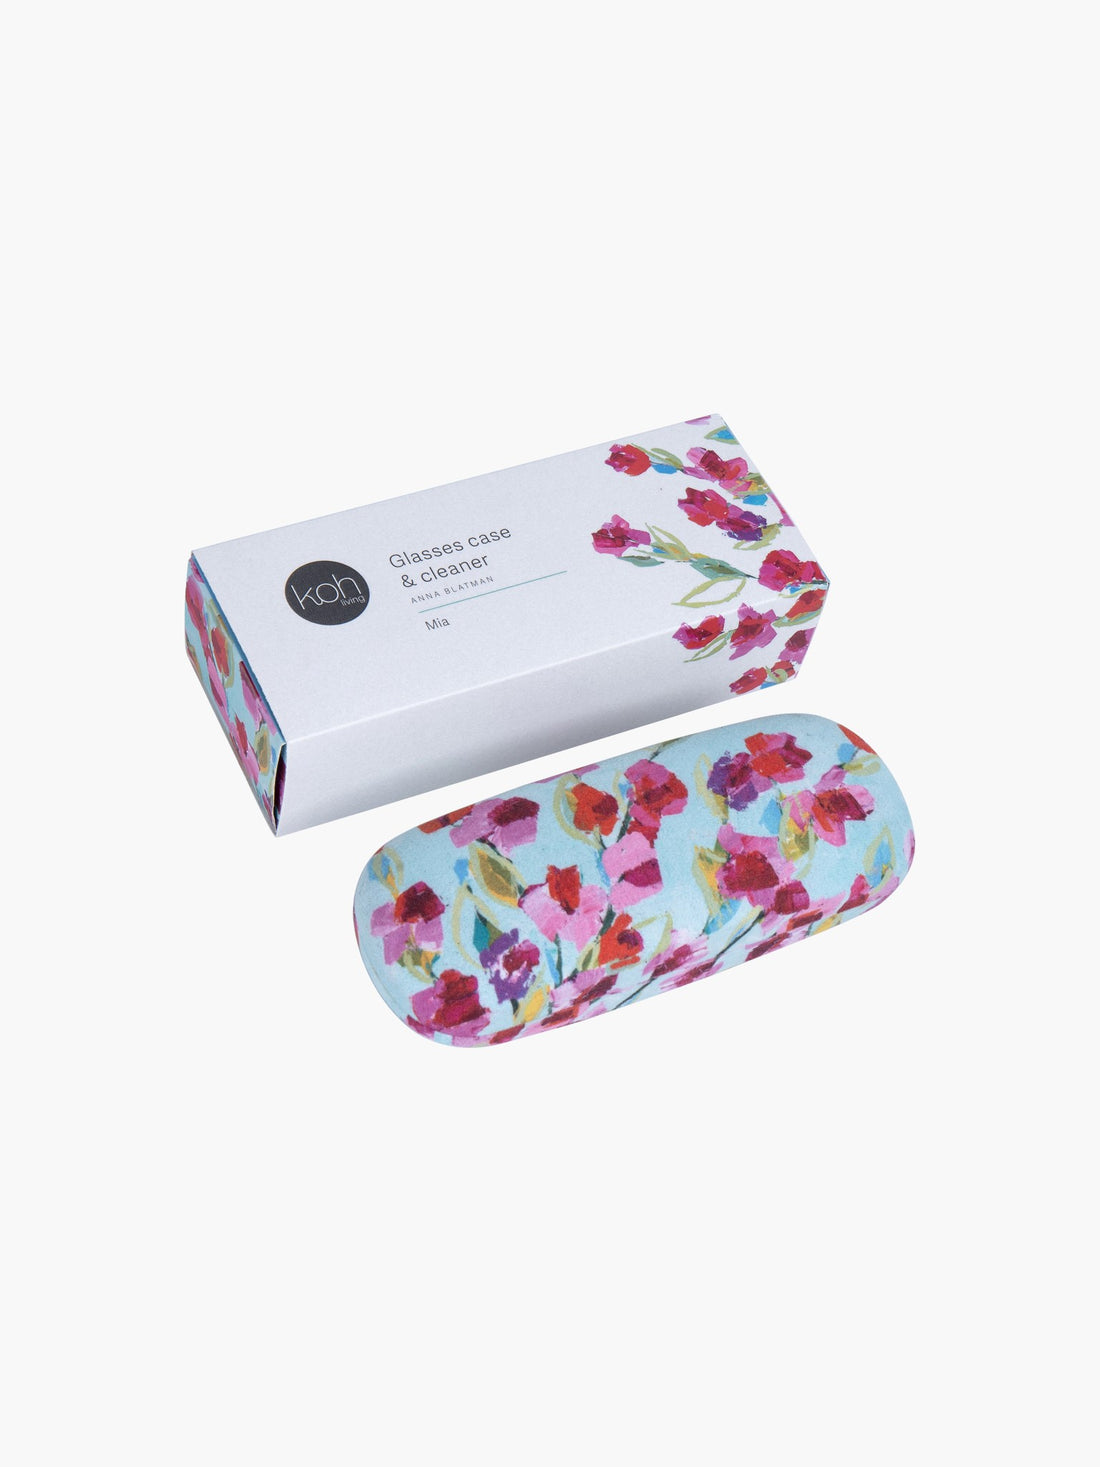 Mia Glasses Case and Lens Cleaner Set